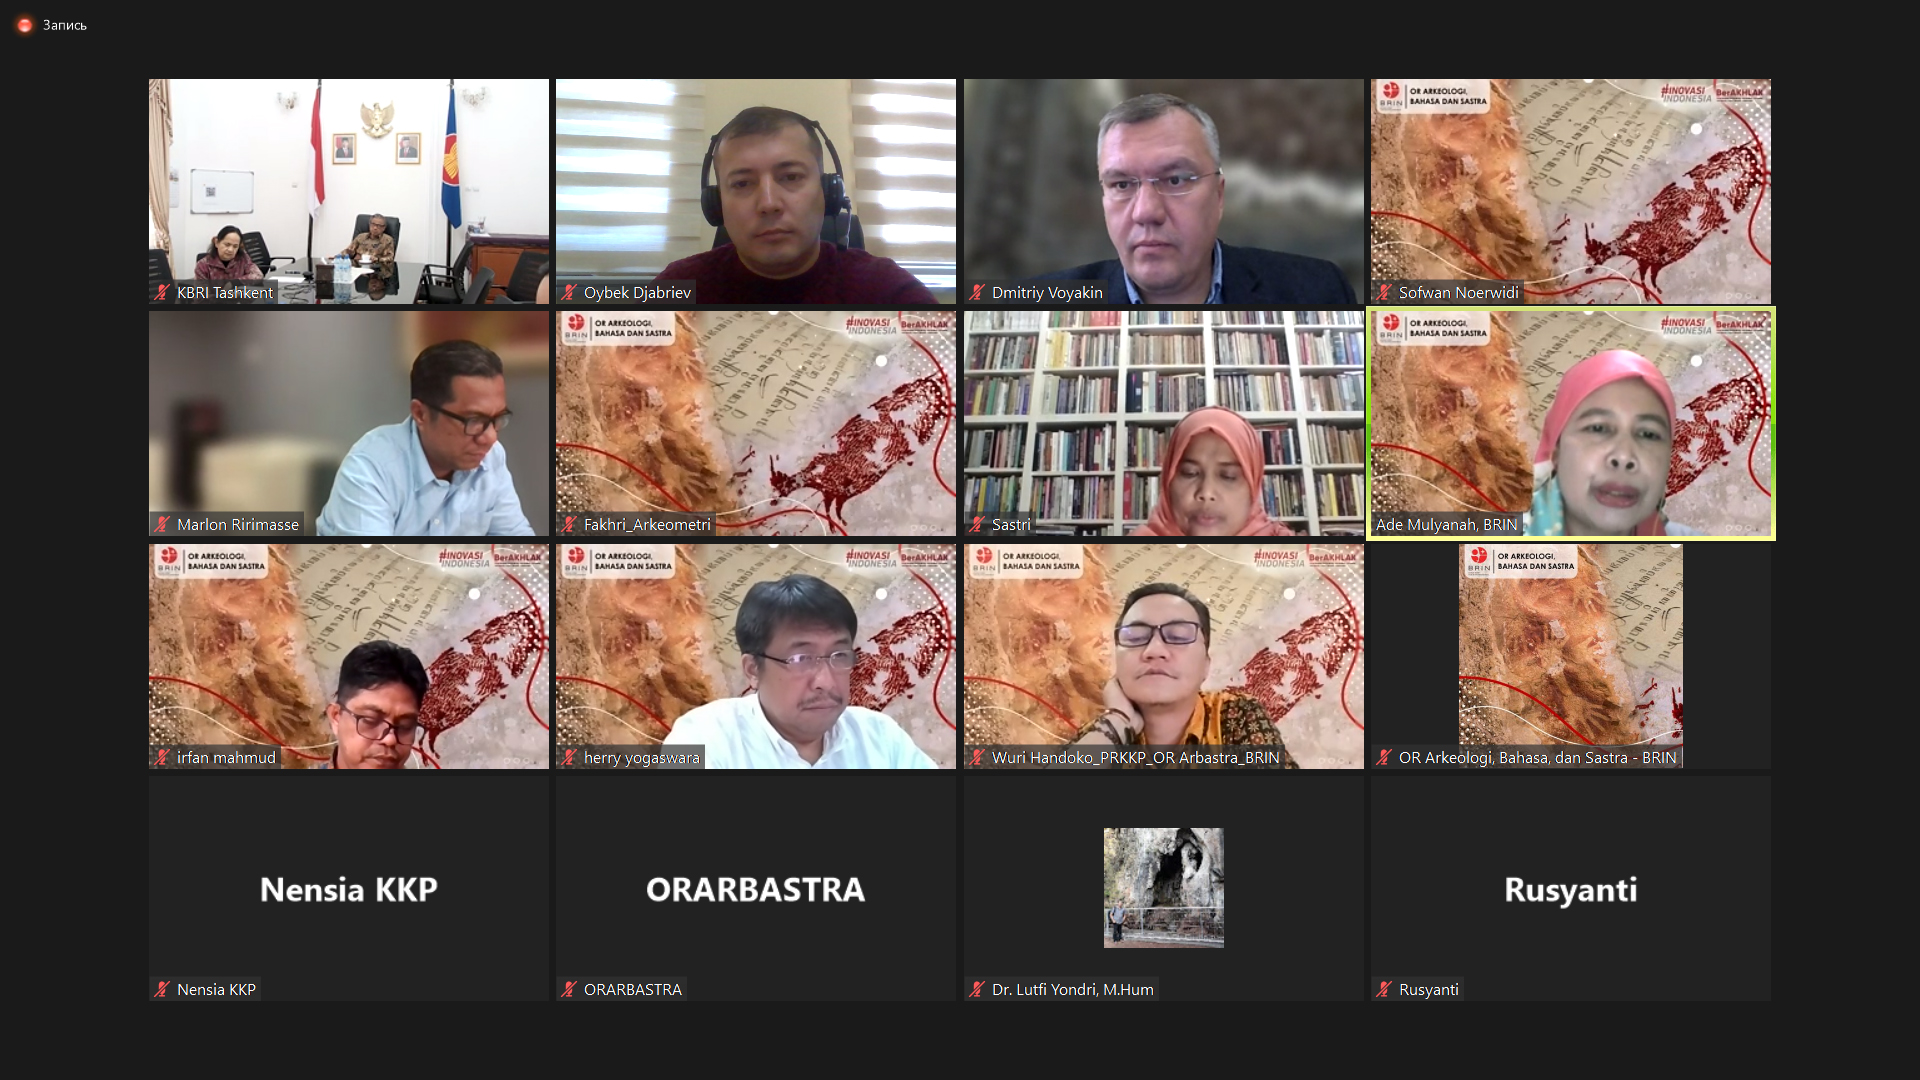 The International Institute for Central Asian Studies (IICAS) held an online conference